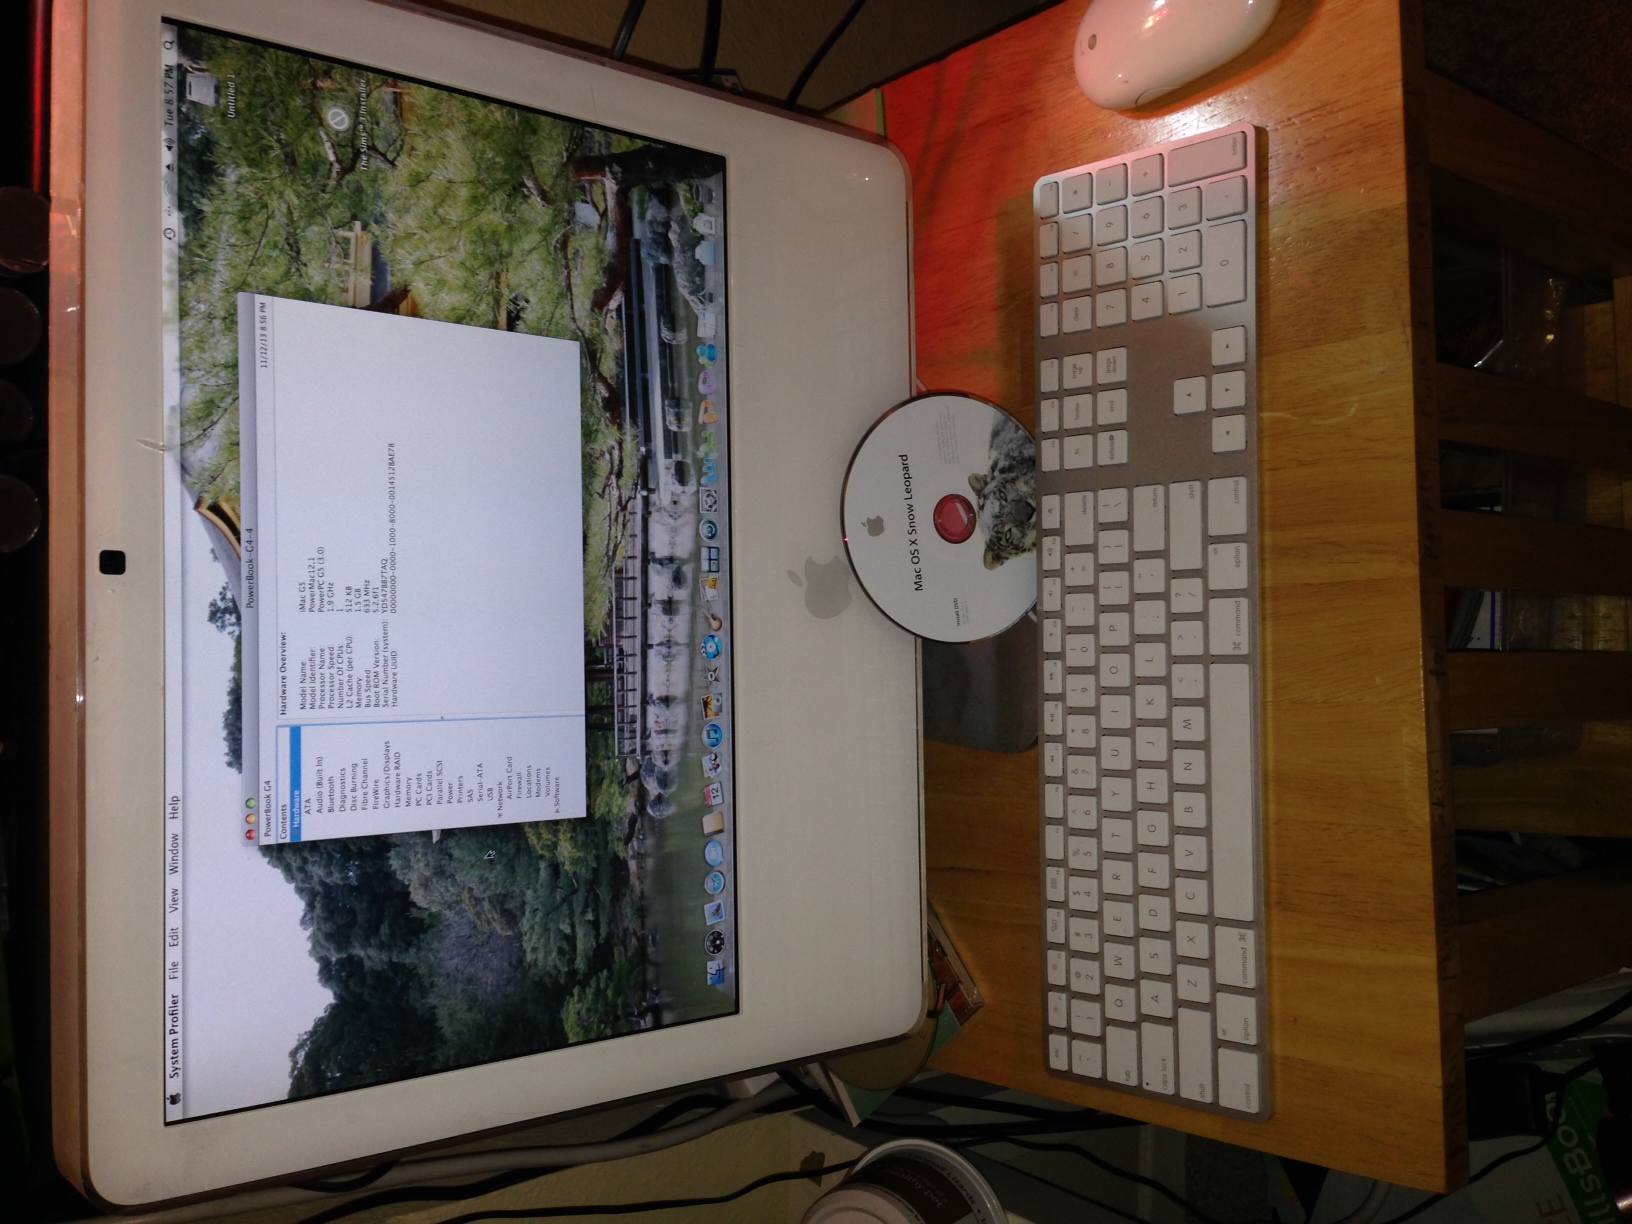 iMac, Keyboard, and Mouse